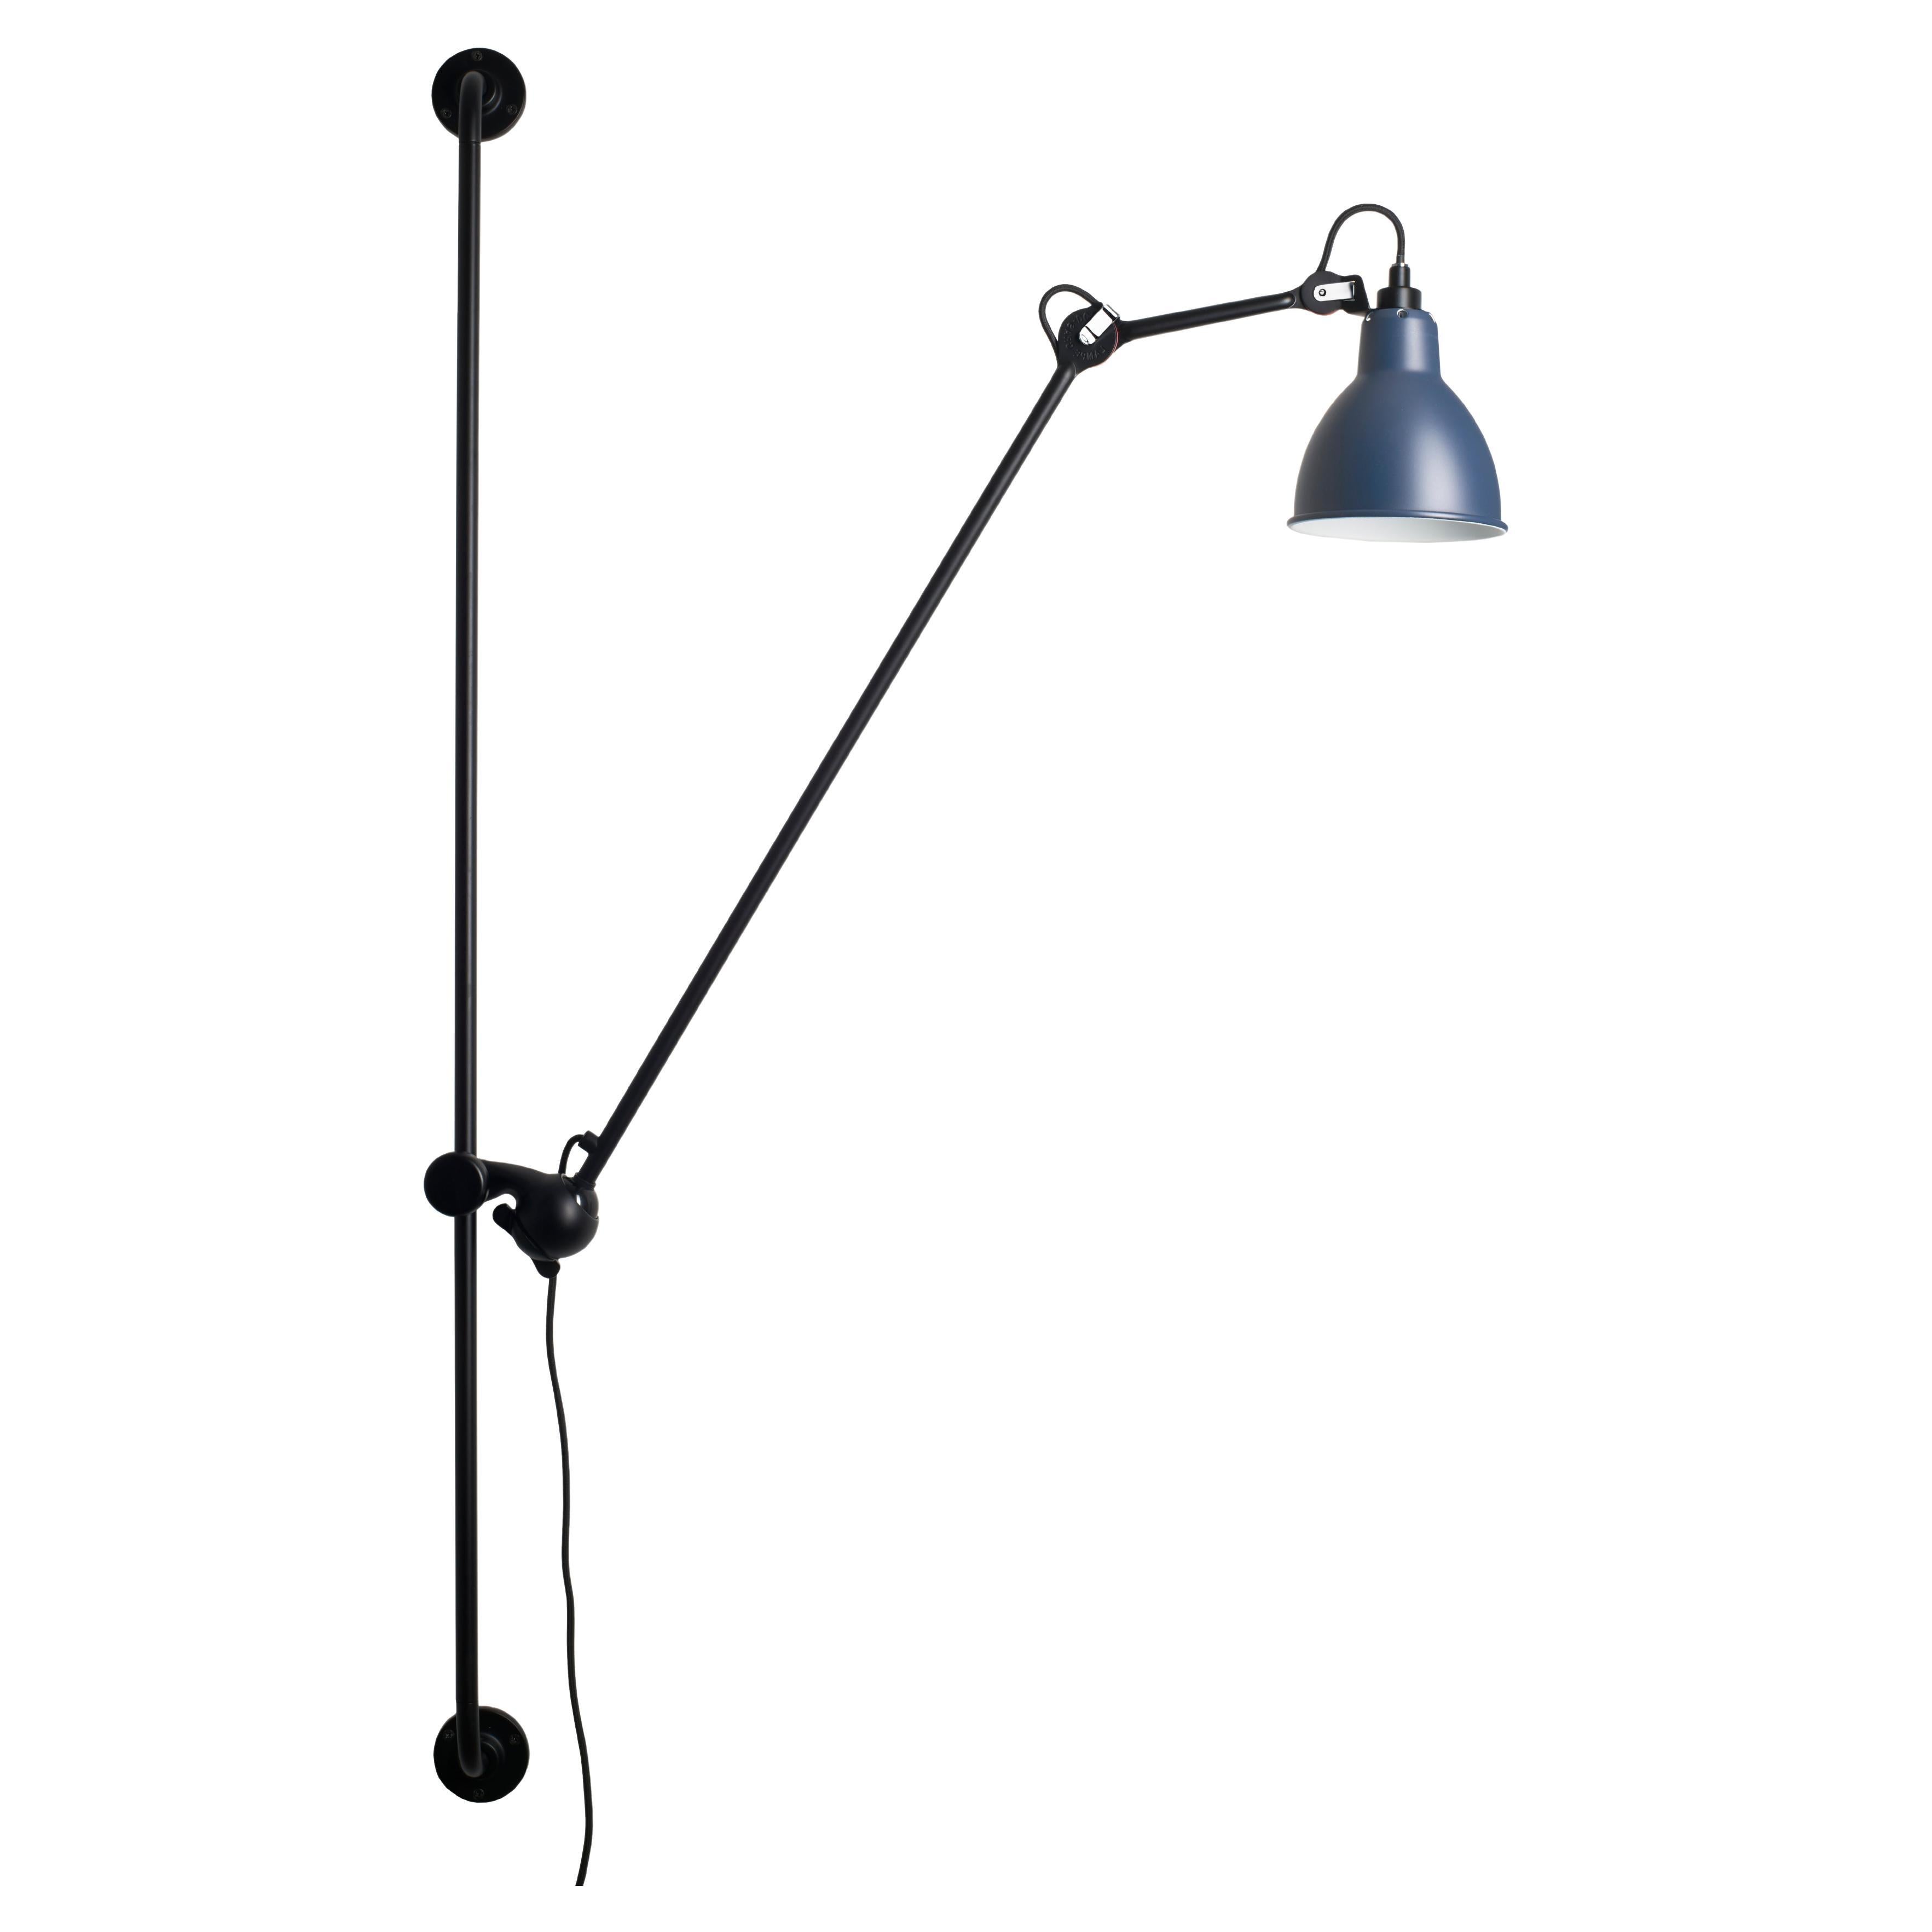 DCW Editions La Lampe Gras N°214 Round Wall Lamp in Black Arm and Blue Shade For Sale